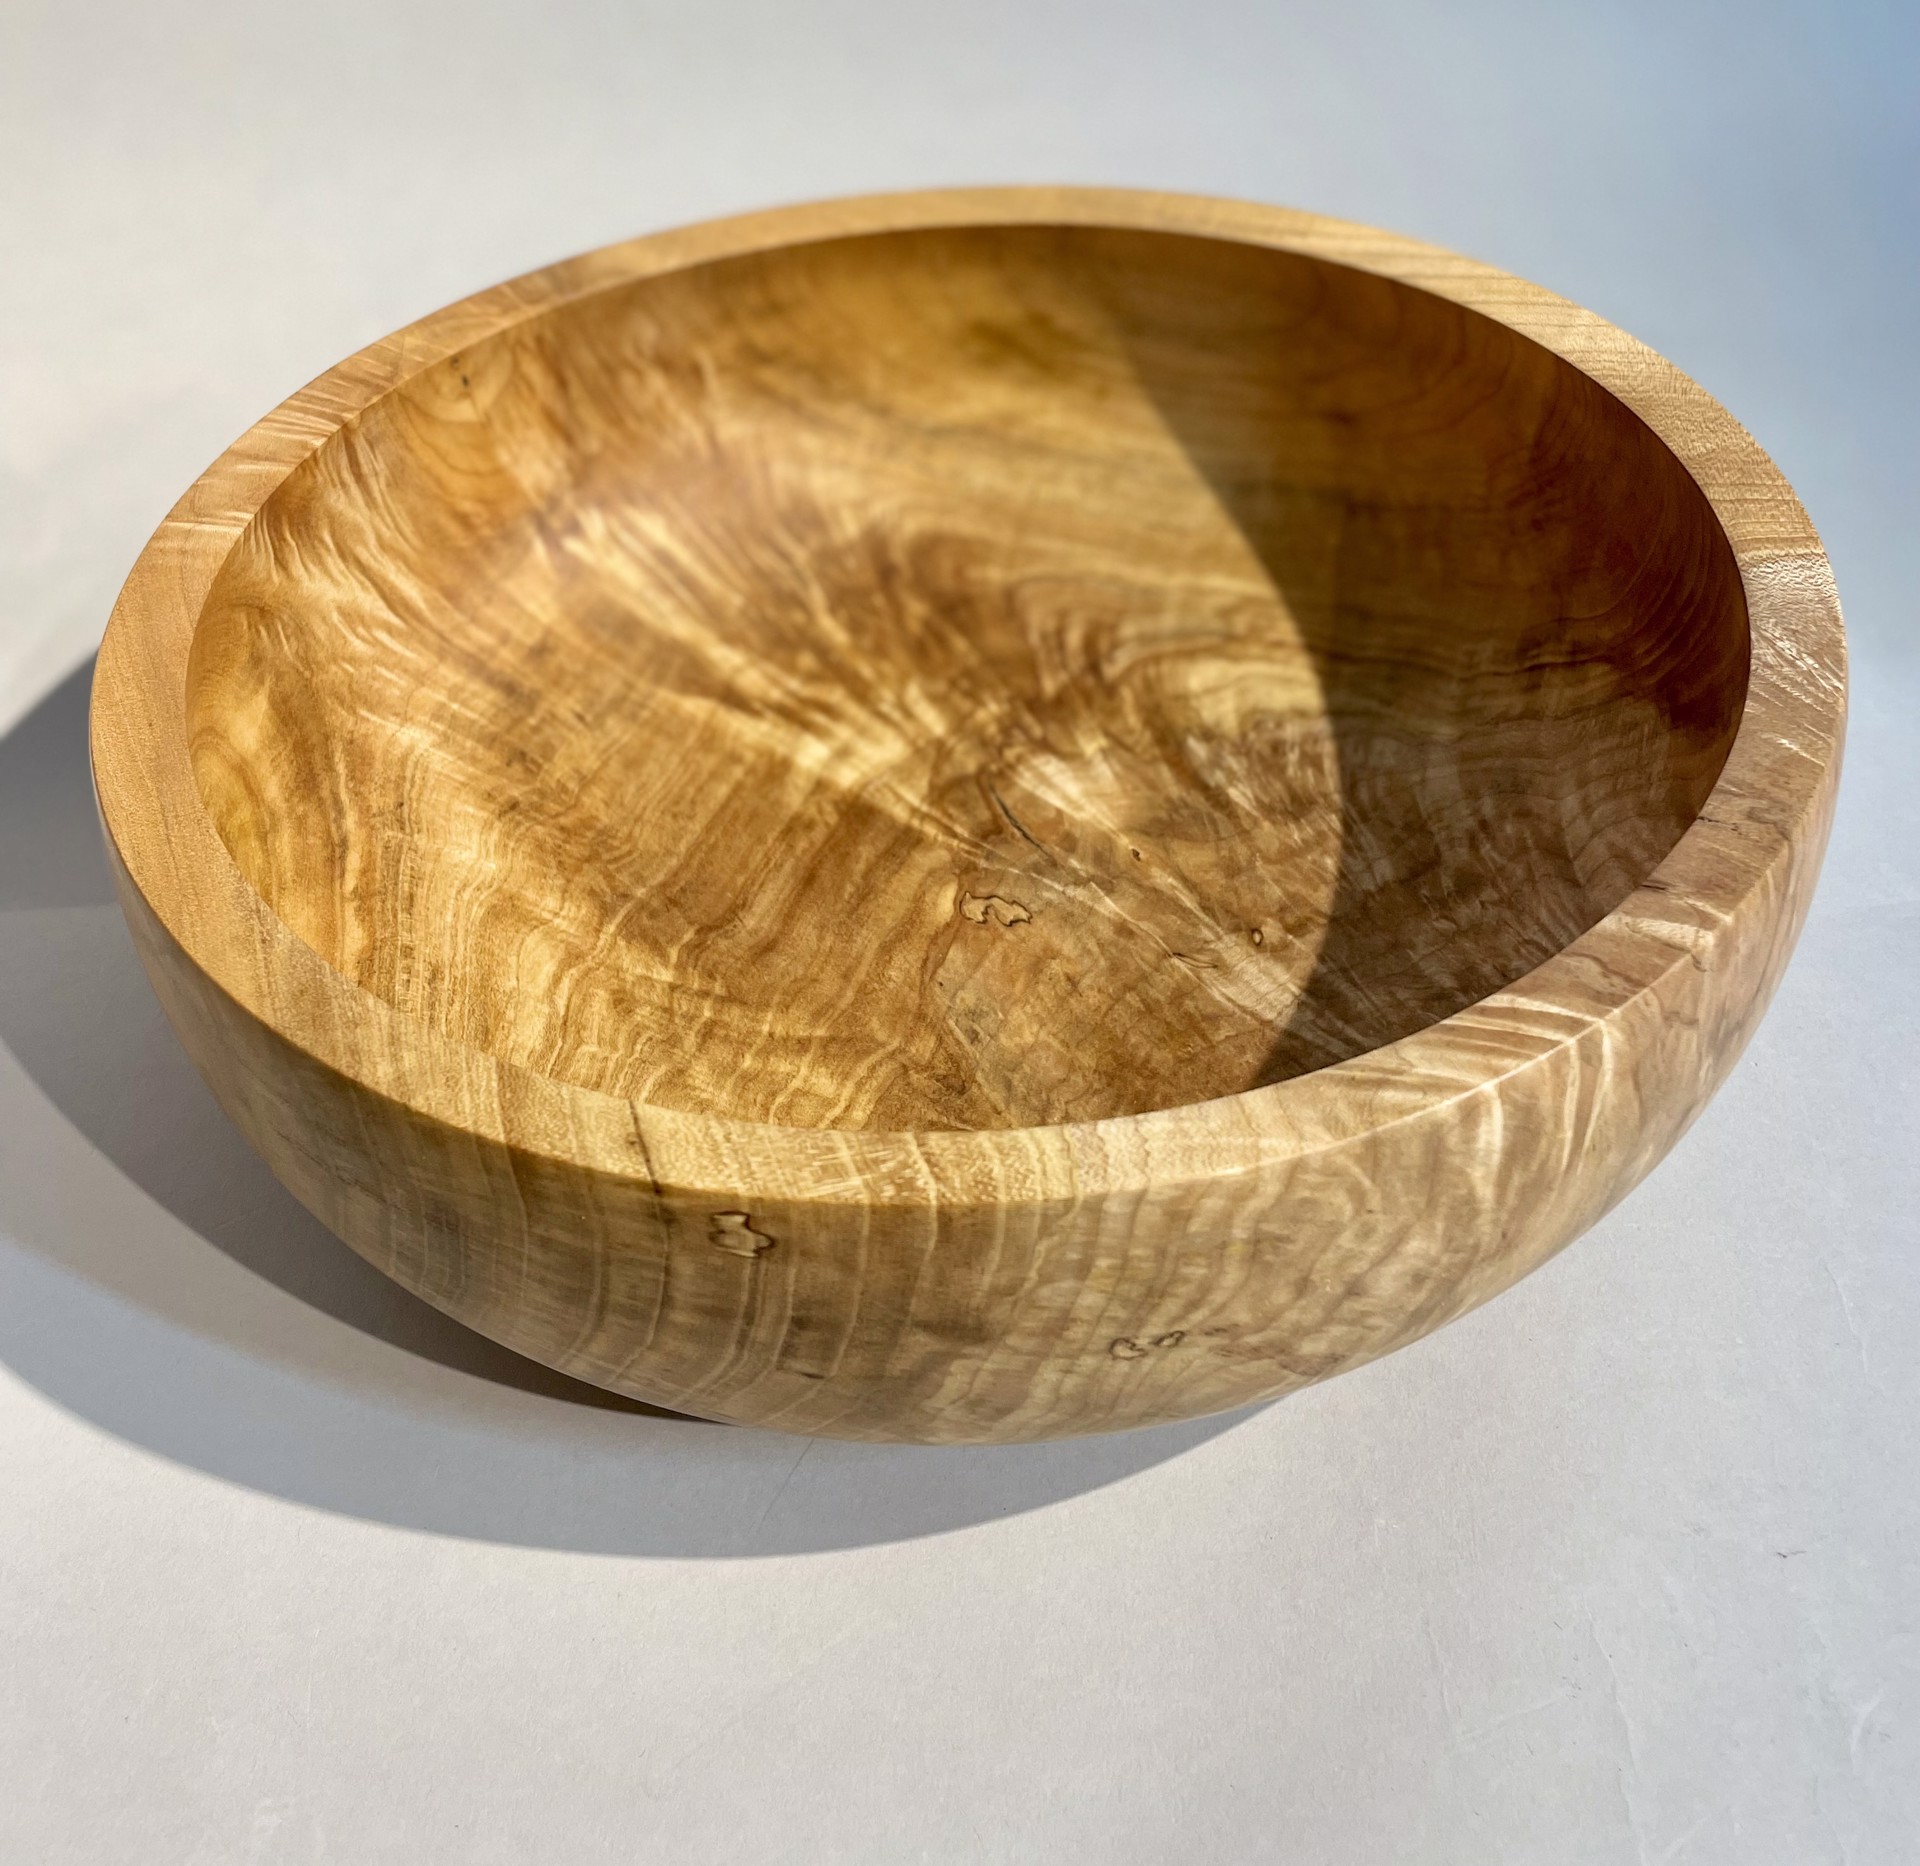 Maple Feather Bowl by Tyler Pierce